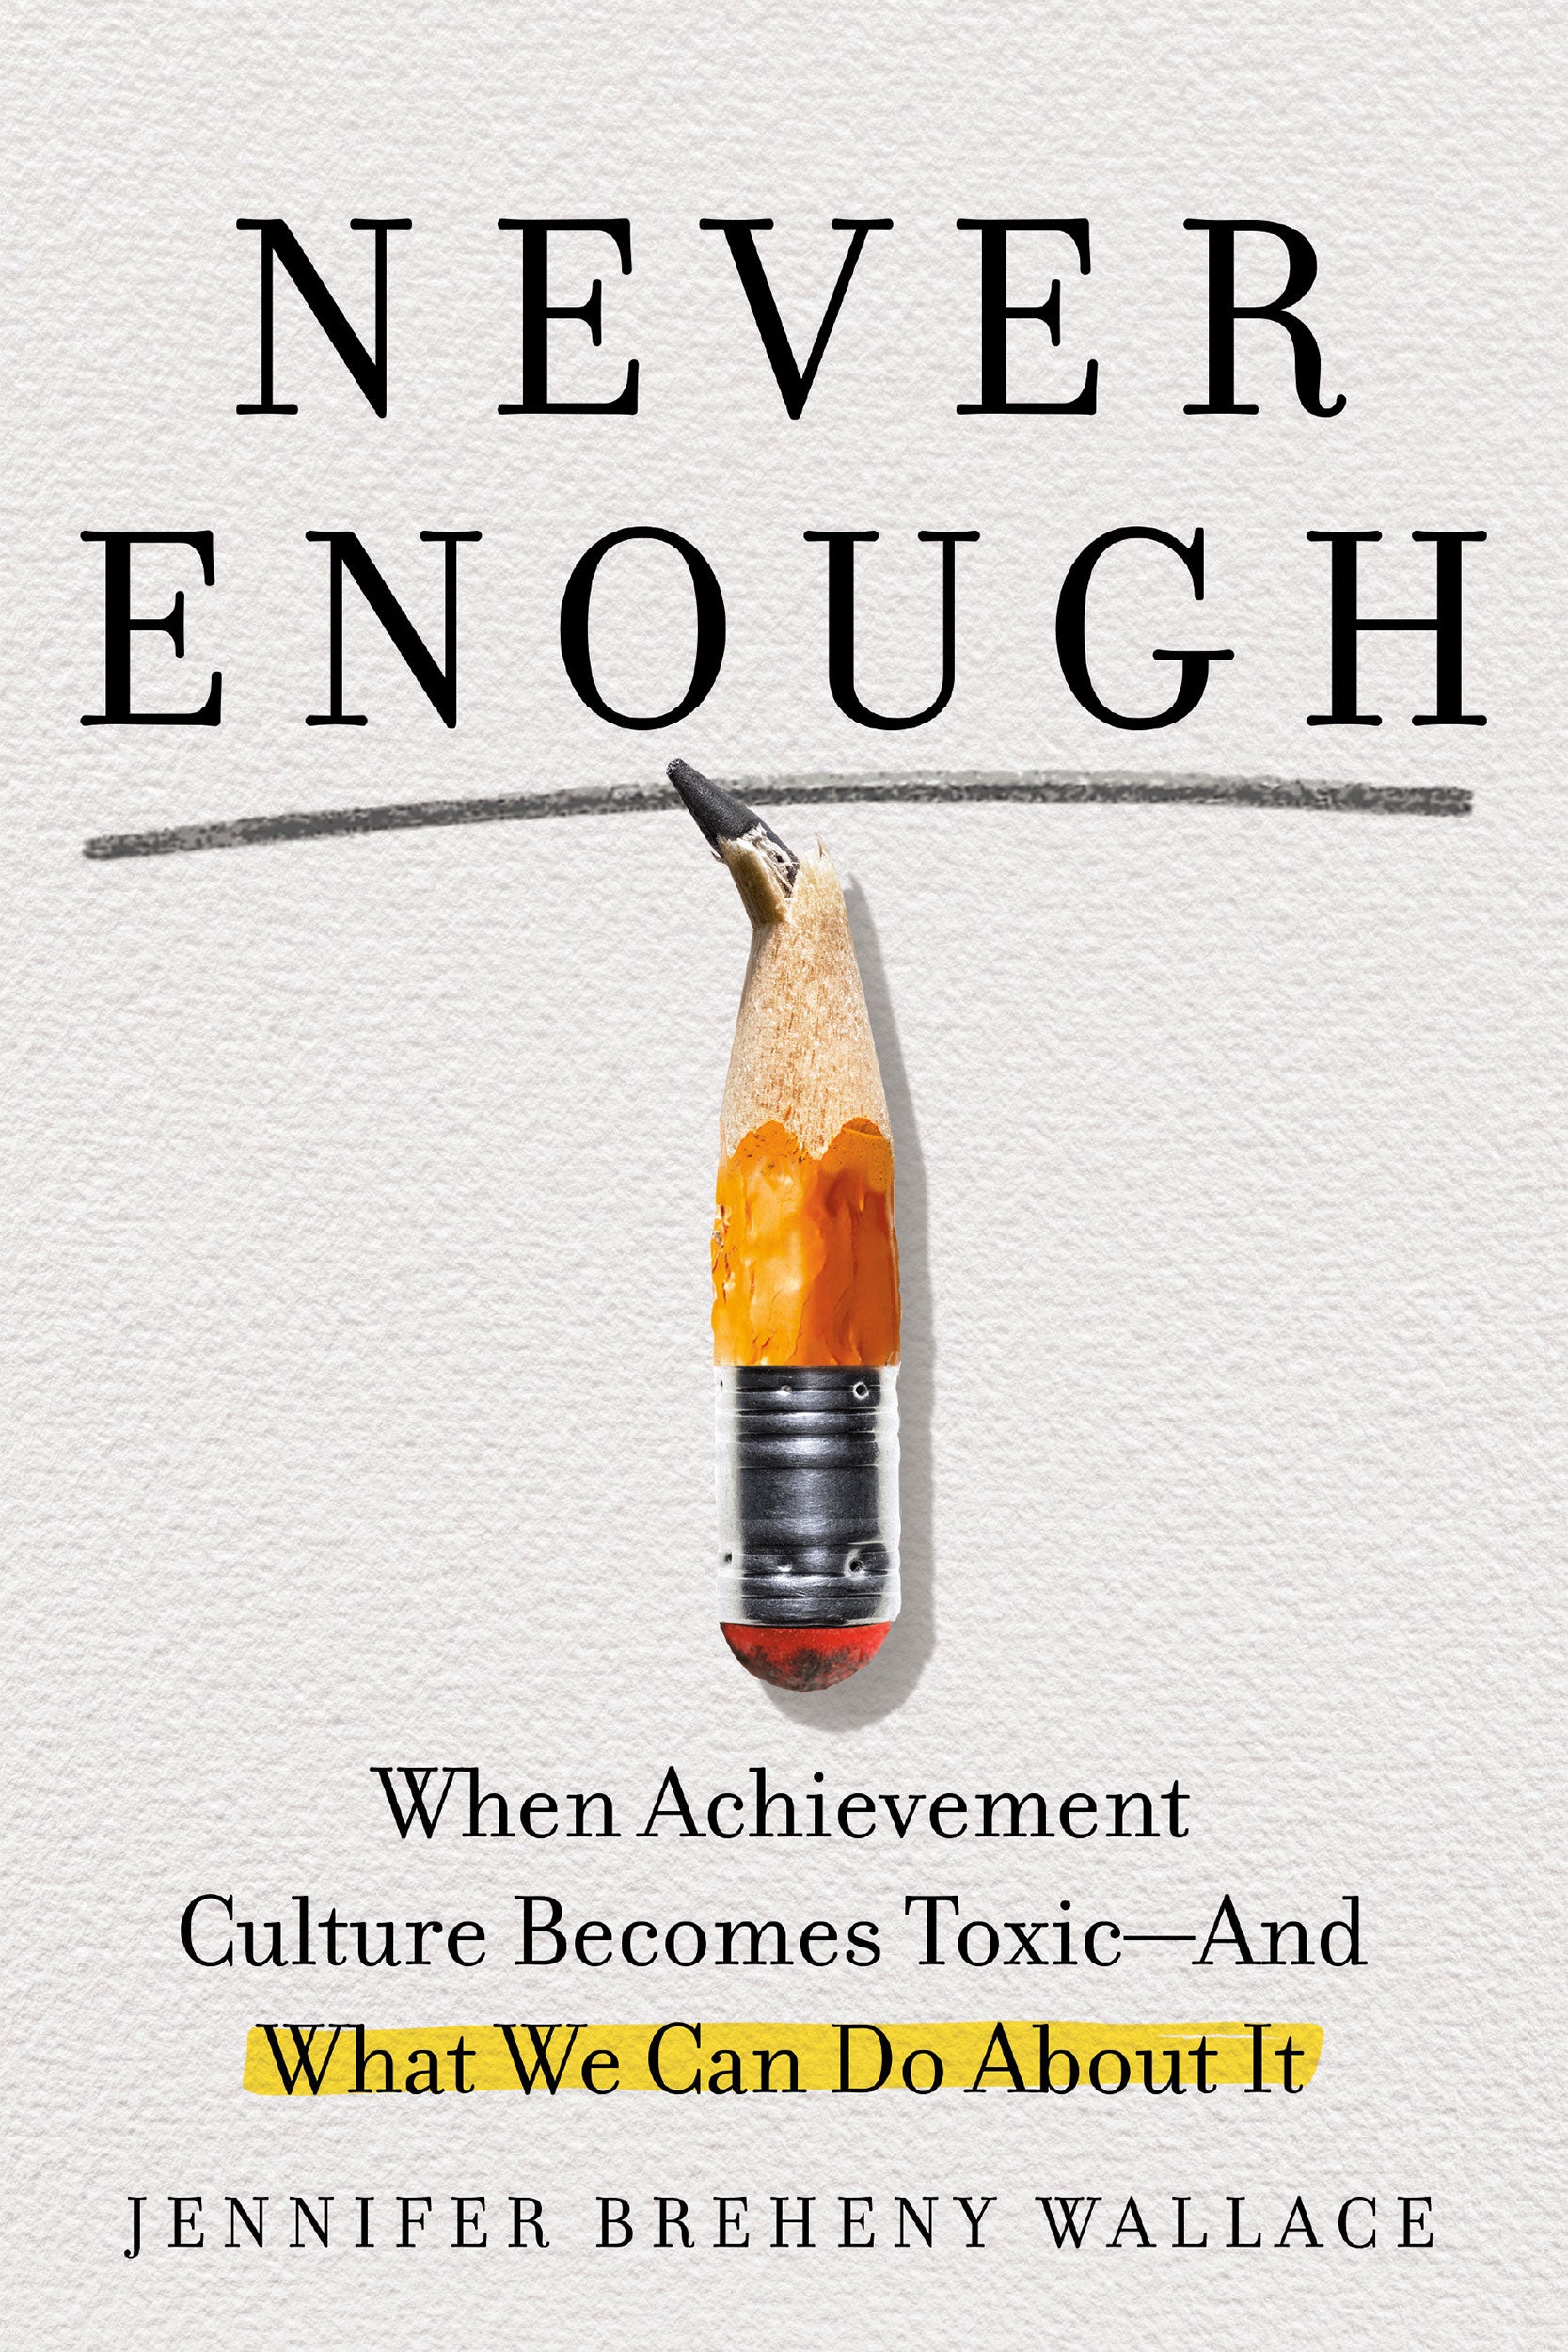 Book Cover for "Never Enough."